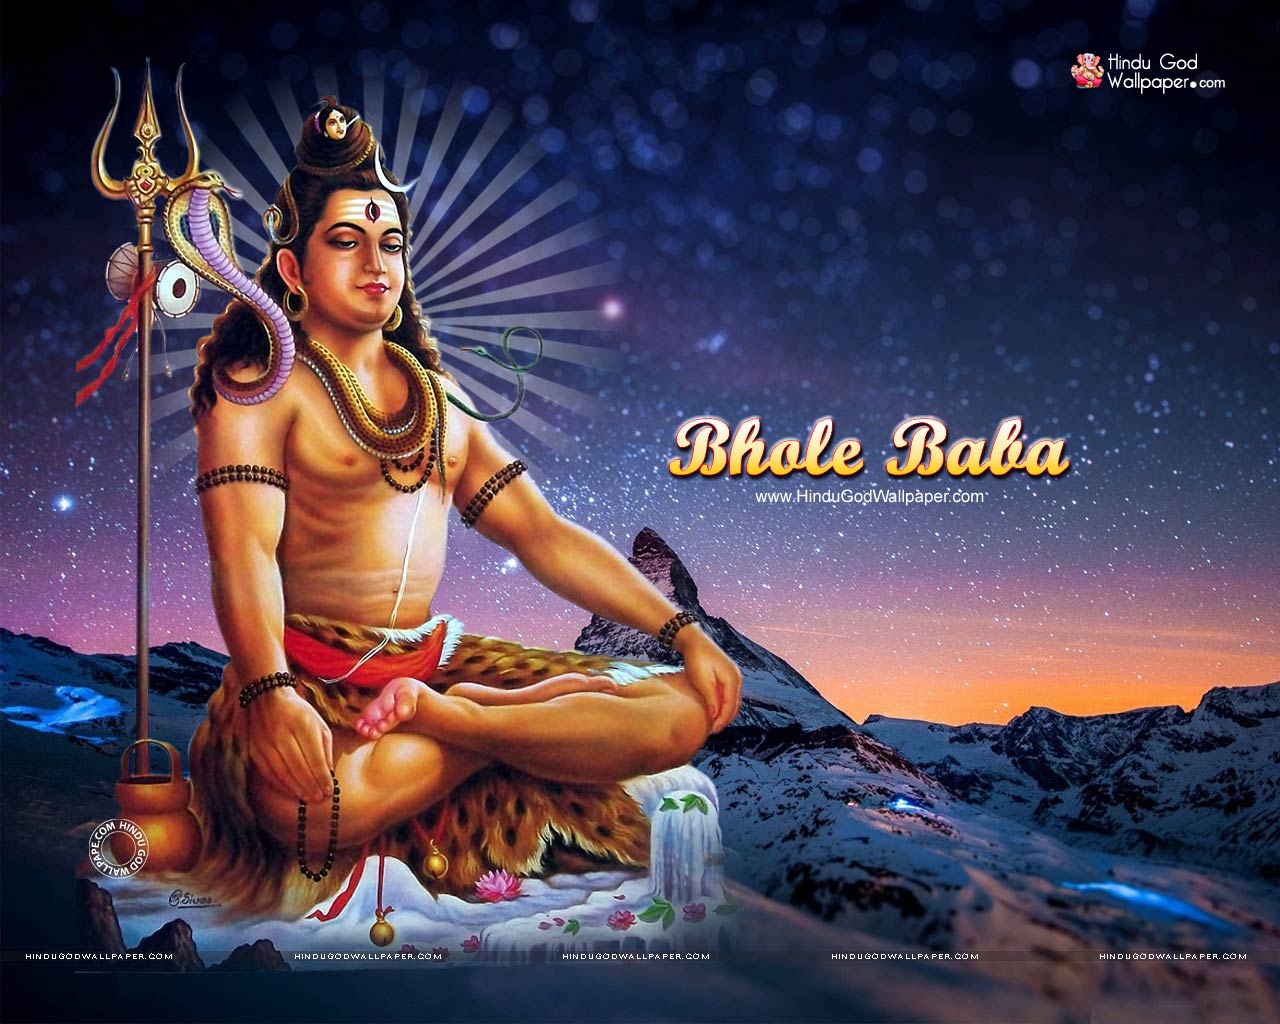 Bhole Baba Wallpapers HD Images, Shiva Photos Free Download